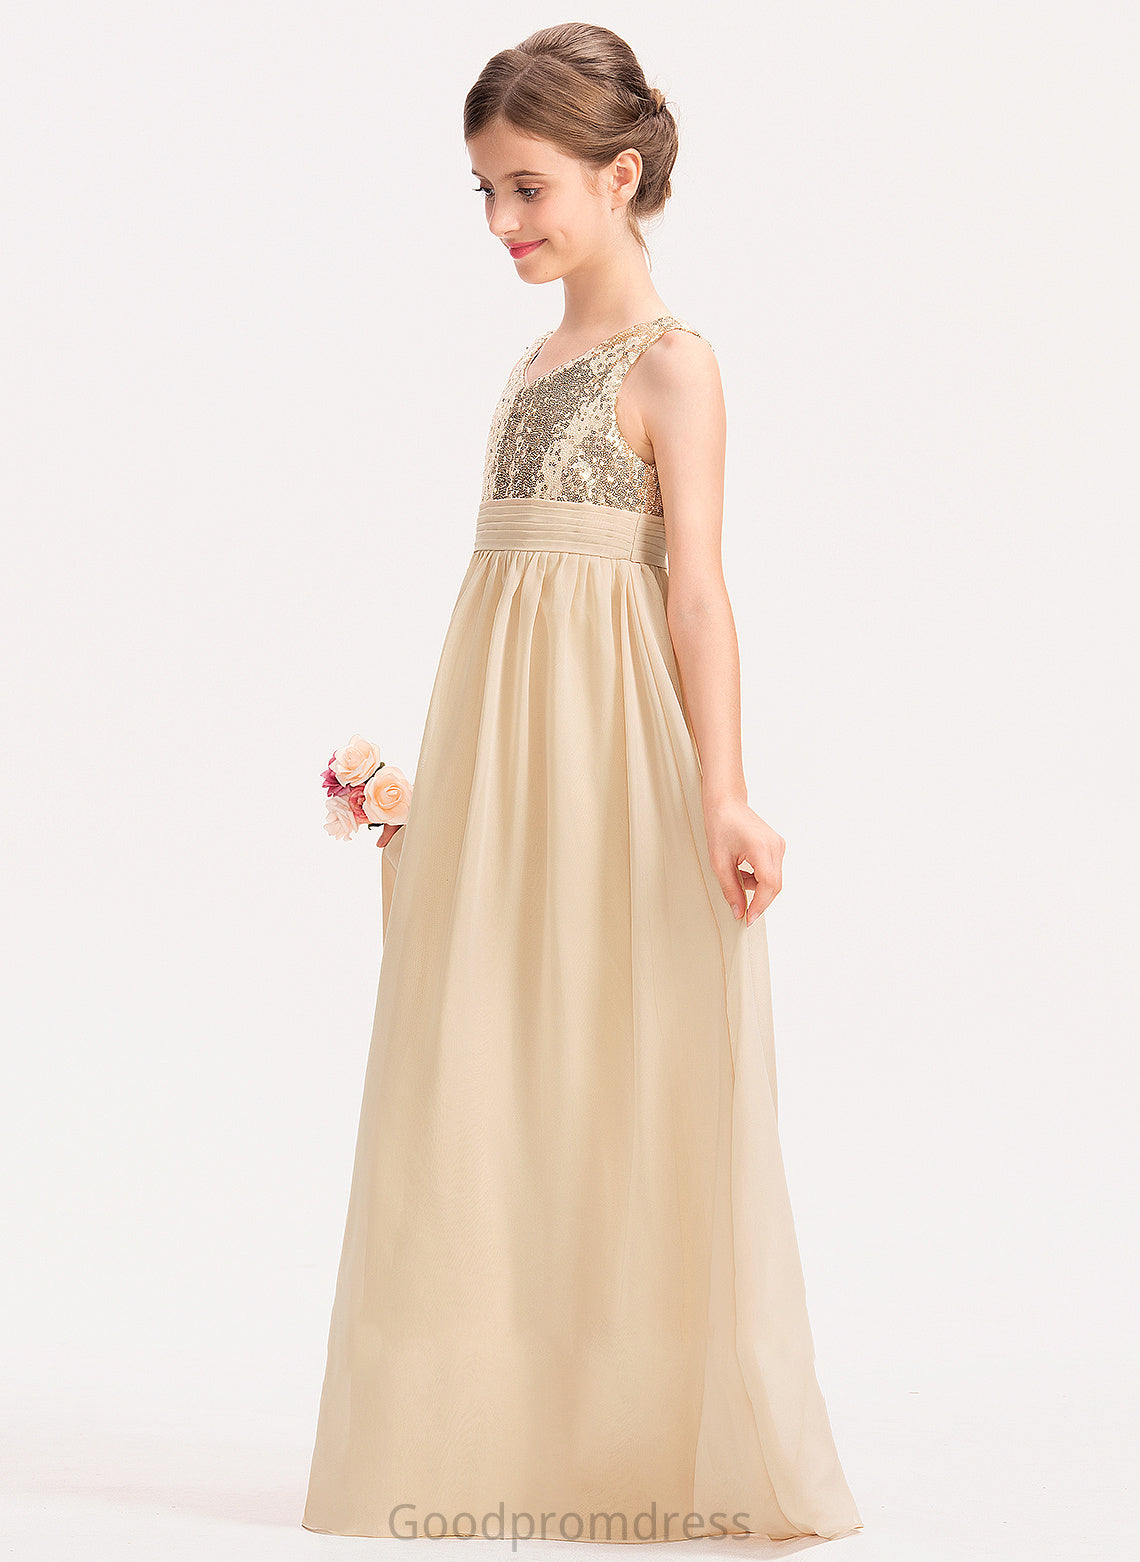 Sequined Ruffle Nell Junior Bridesmaid Dresses A-Line With Chiffon V-neck Floor-Length